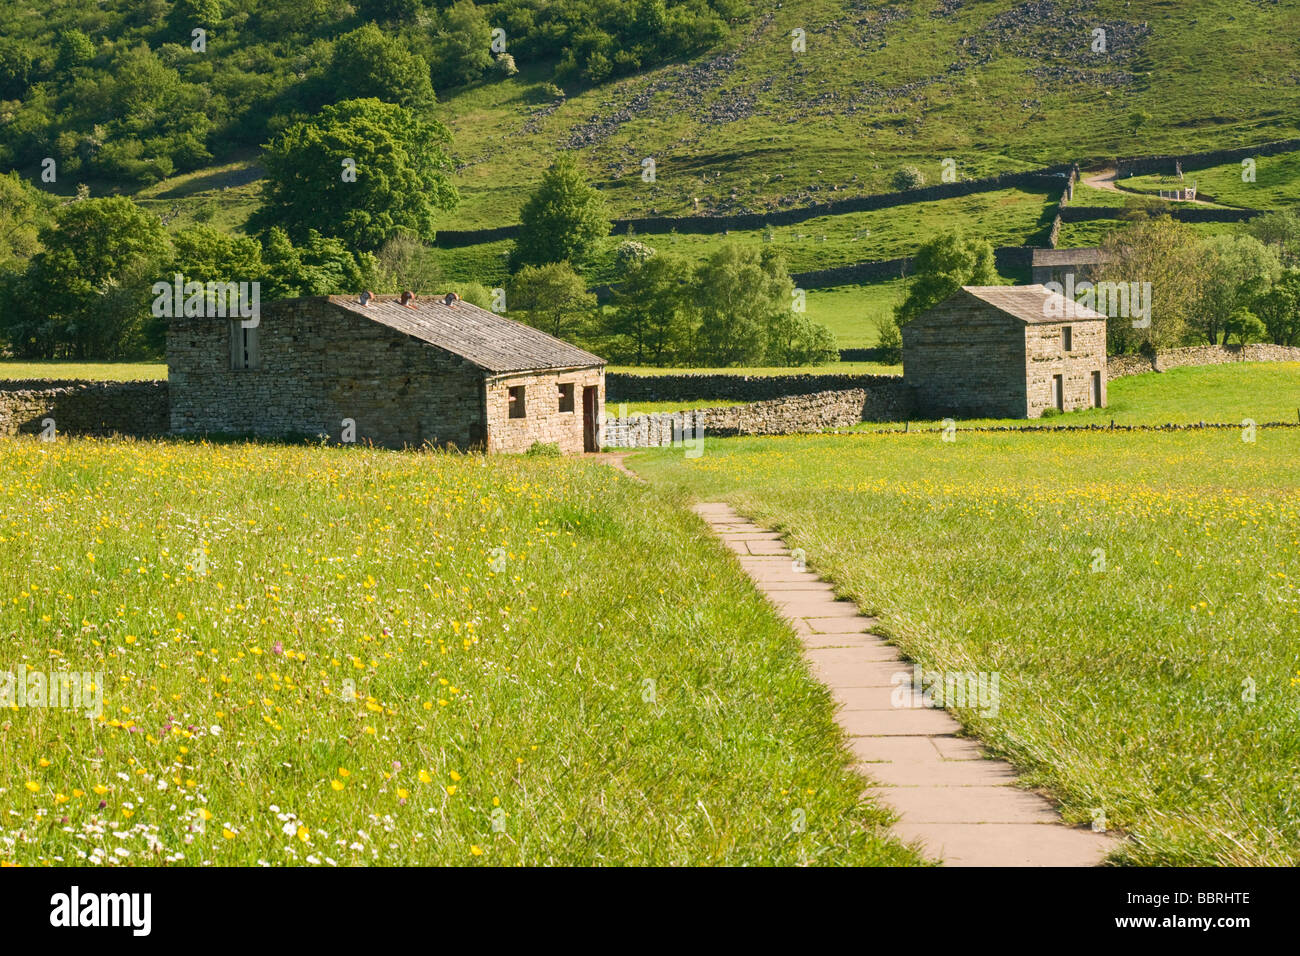 Footpath with barns and traditional hay meadows near Muker in Upper Swaledale. Yorkshire dales National Park. Stock Photo